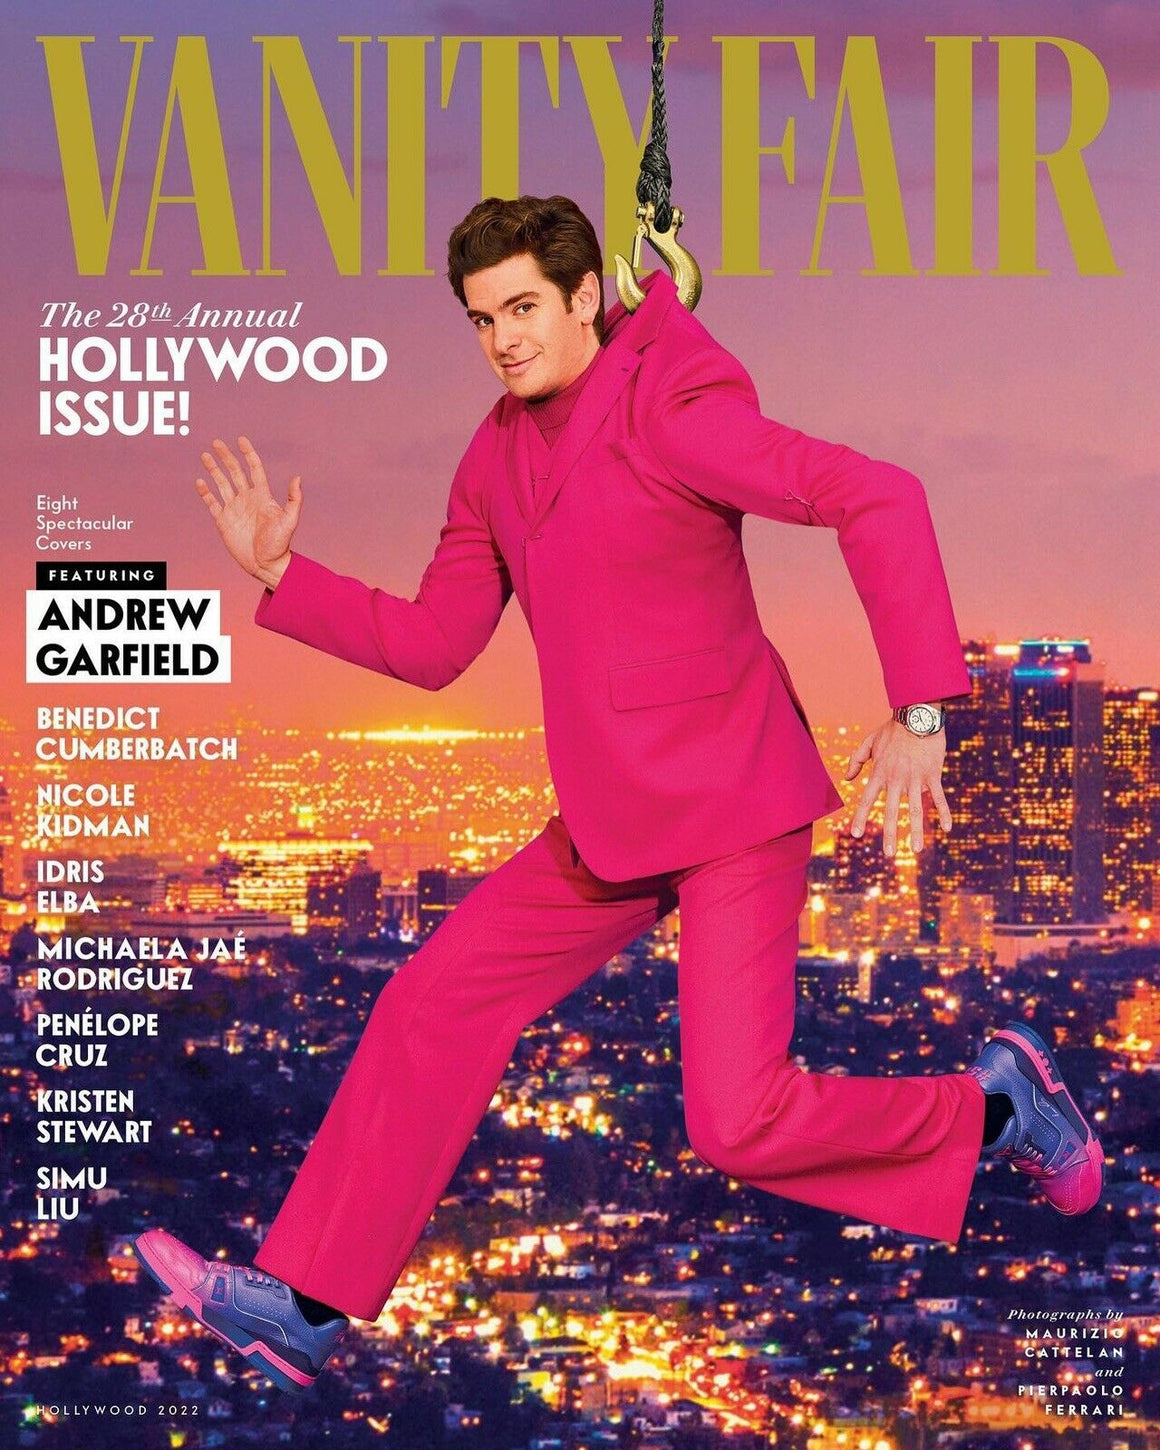 VANITY FAIR March 2022 28TH ANNUAL HOLLYWOOD - ANDREW GARFIELD (Pre-Order)